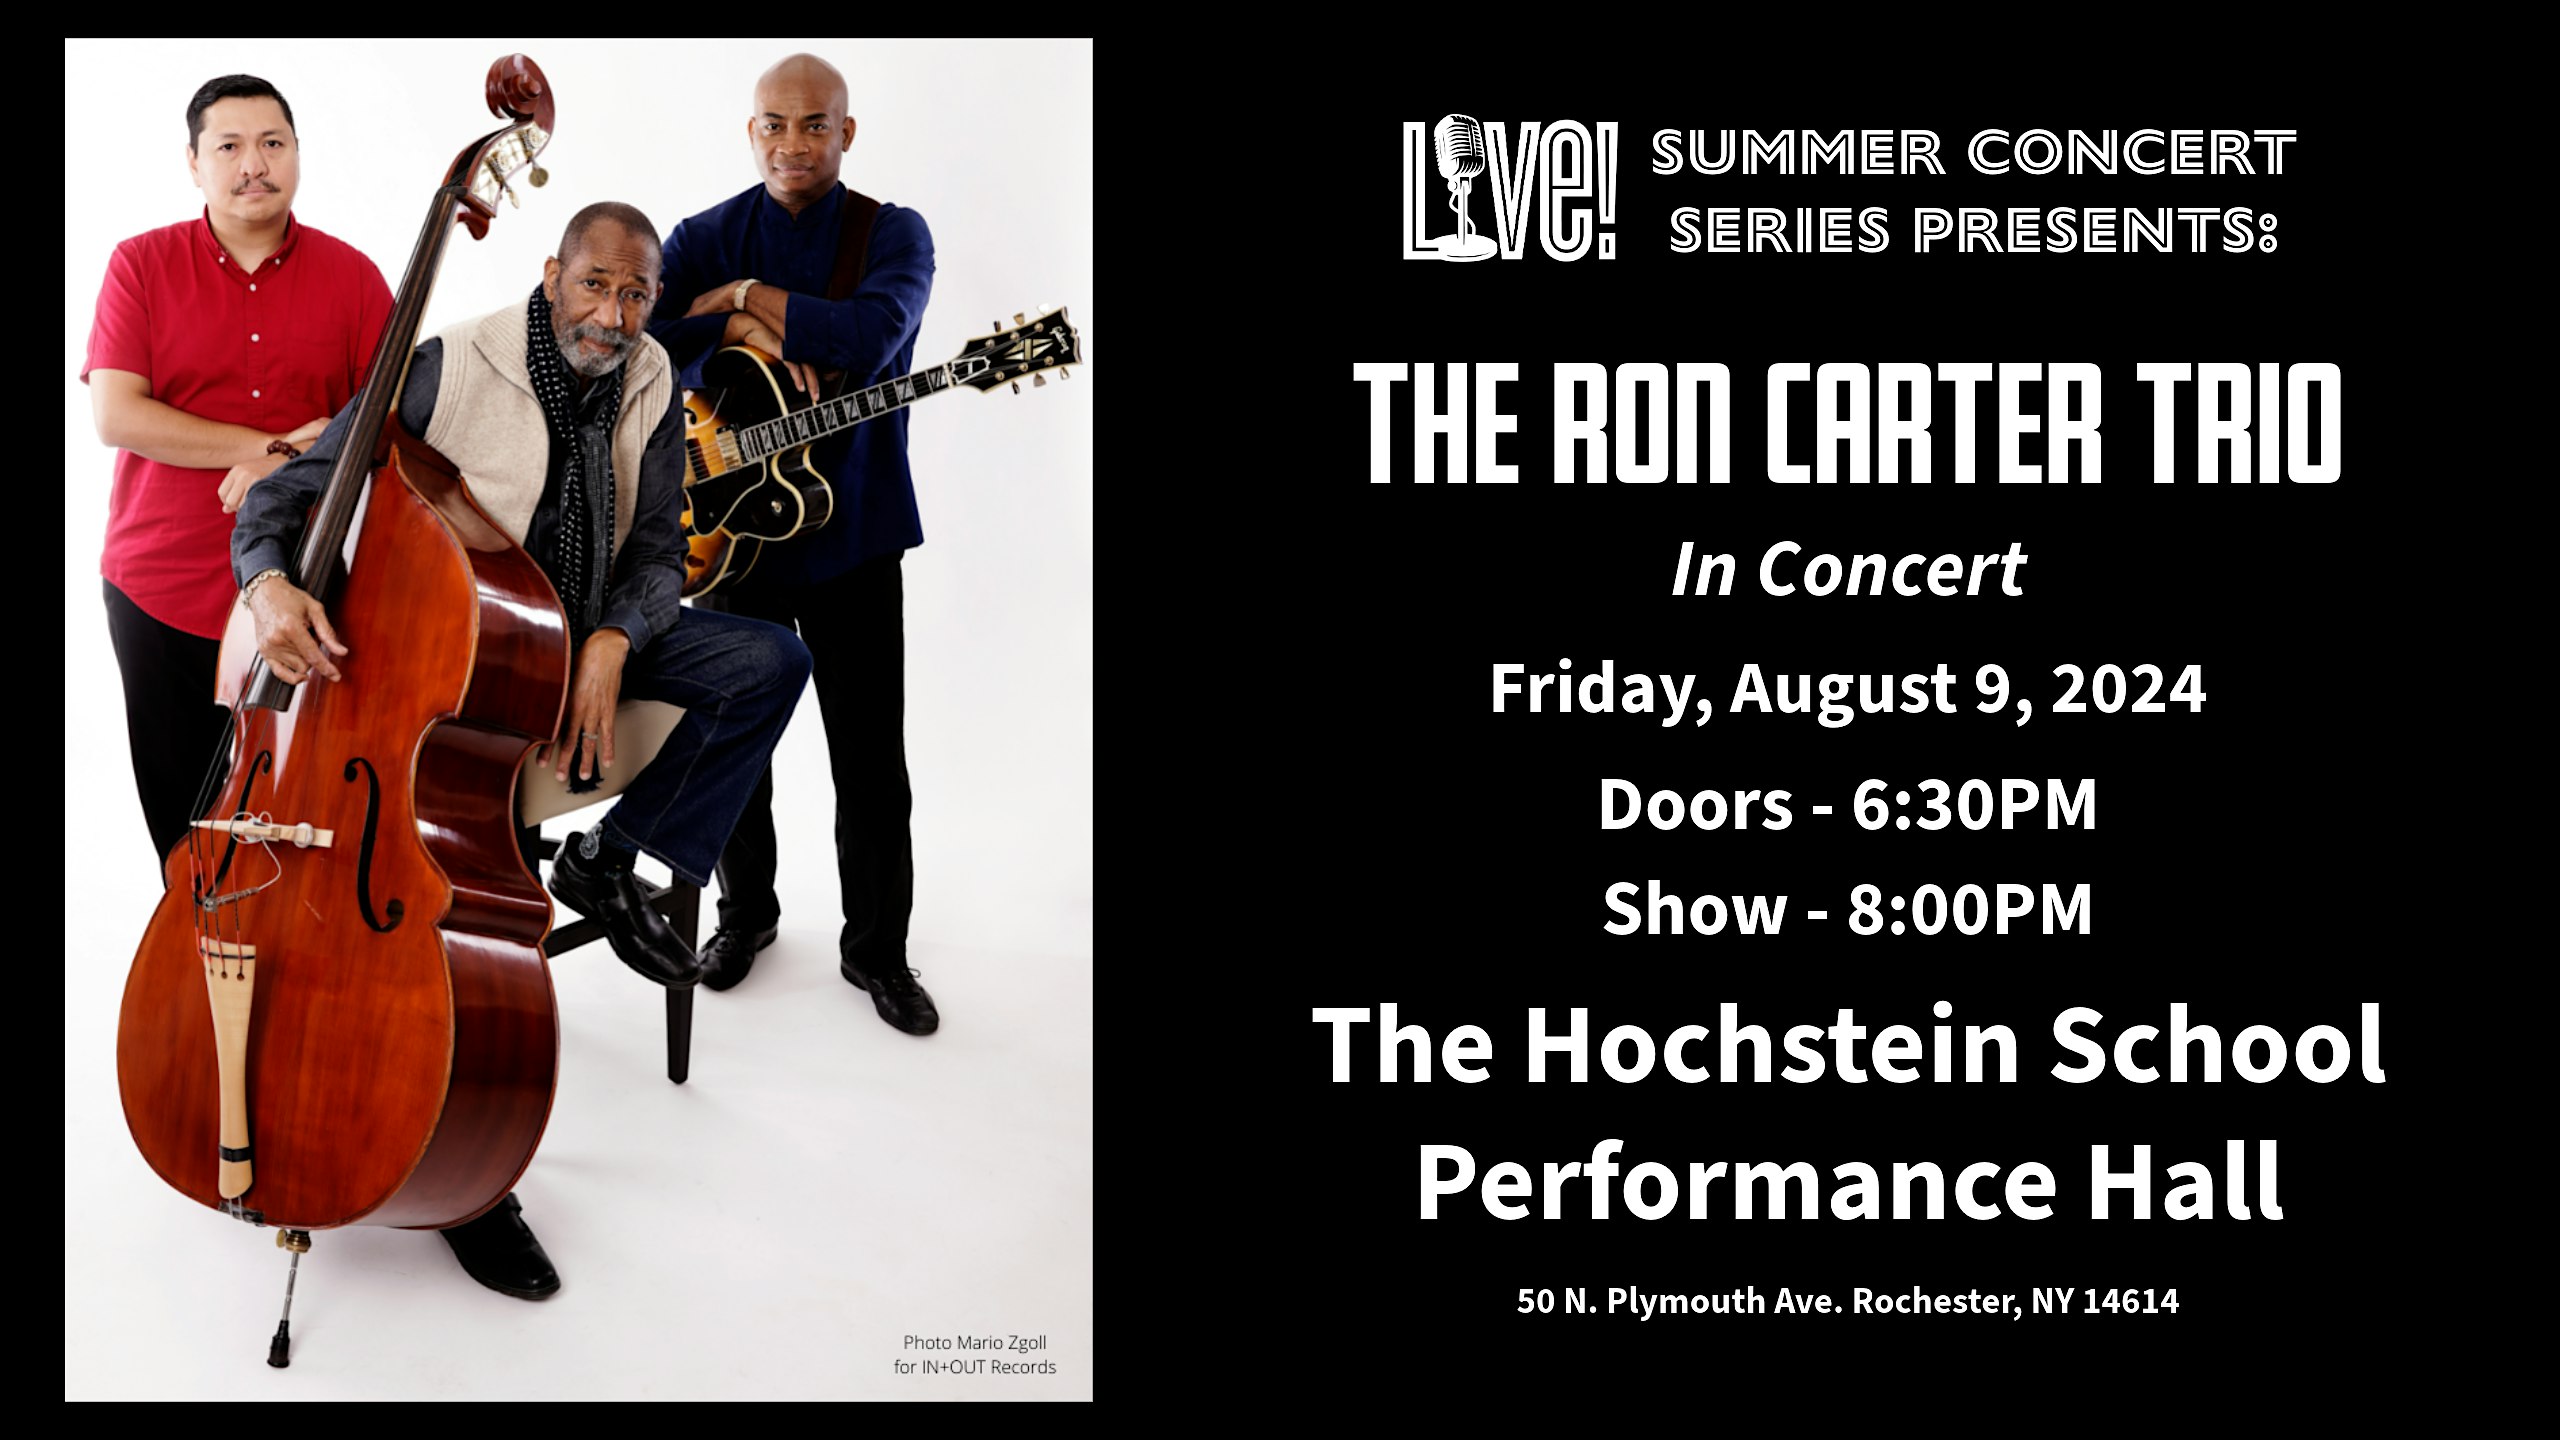 The Live! Summer Concert Series Presents: The Ron Carter Trio